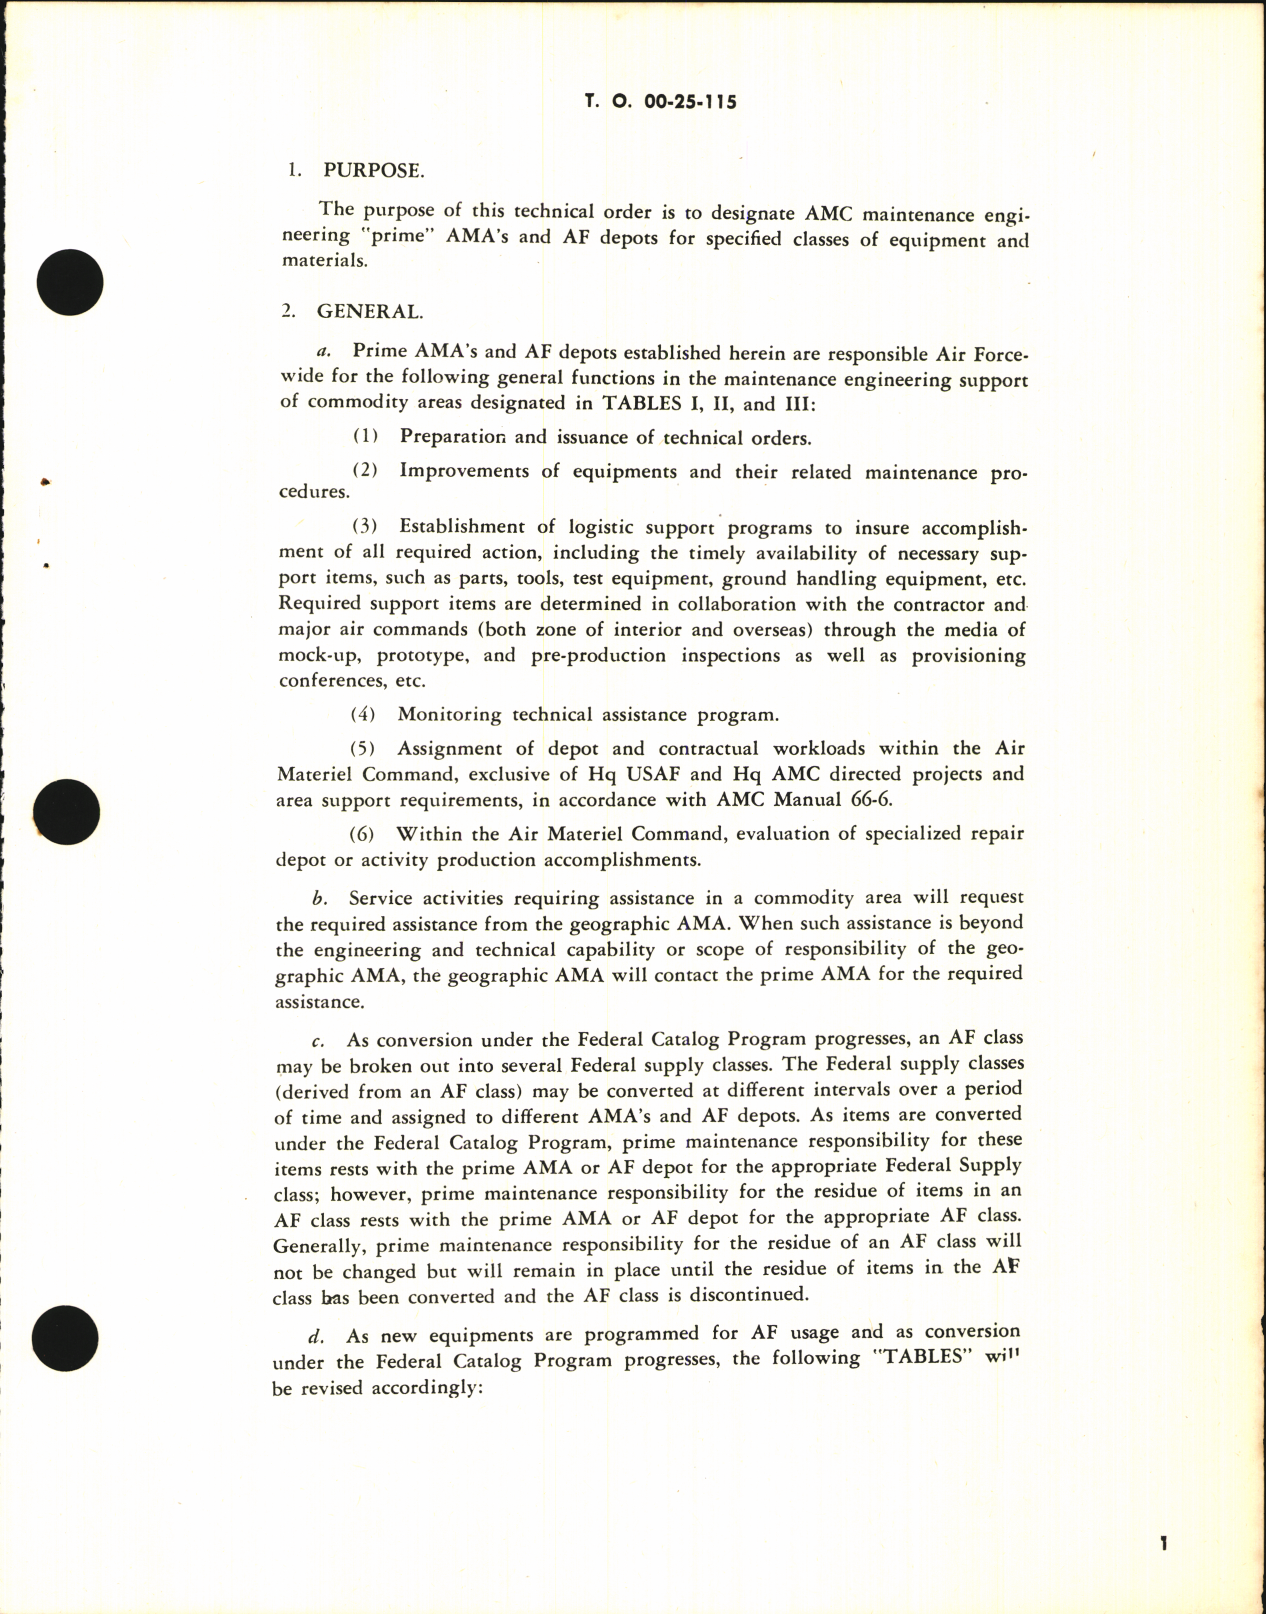 Sample page 3 from AirCorps Library document: Designation of AMC Maintenance Engineering 